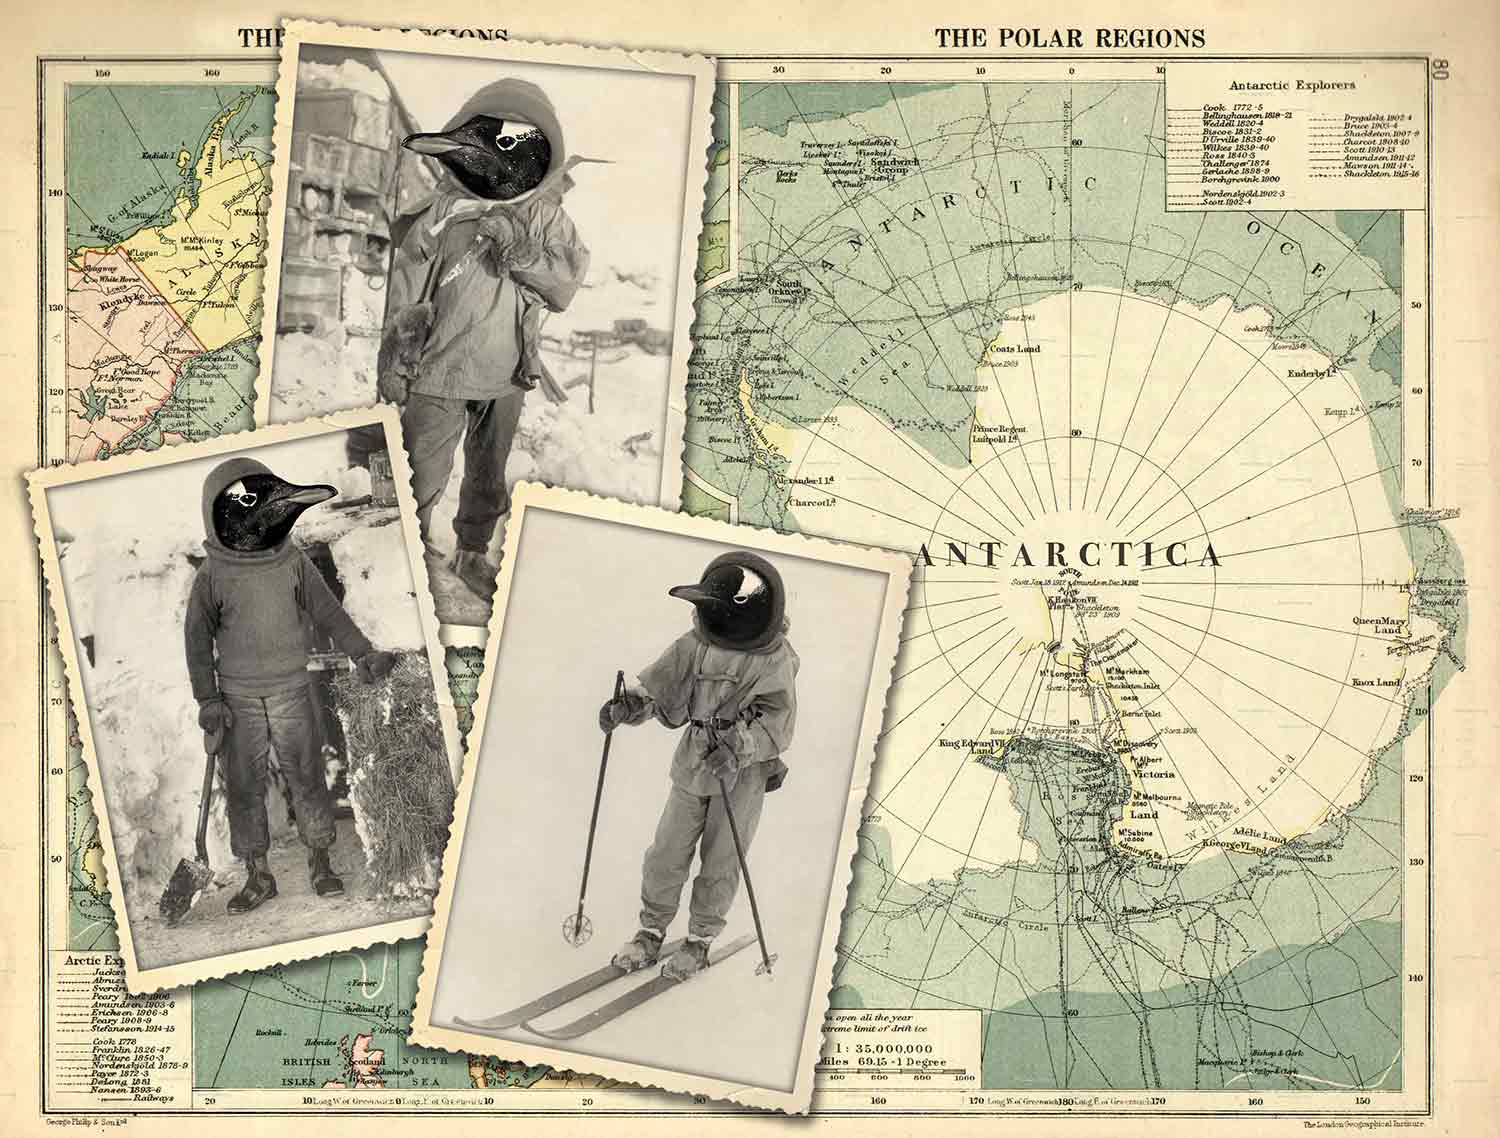 Three black and white photos of Antarctic explorers with penguin heads superimposed and a map of Antarctica in the background.